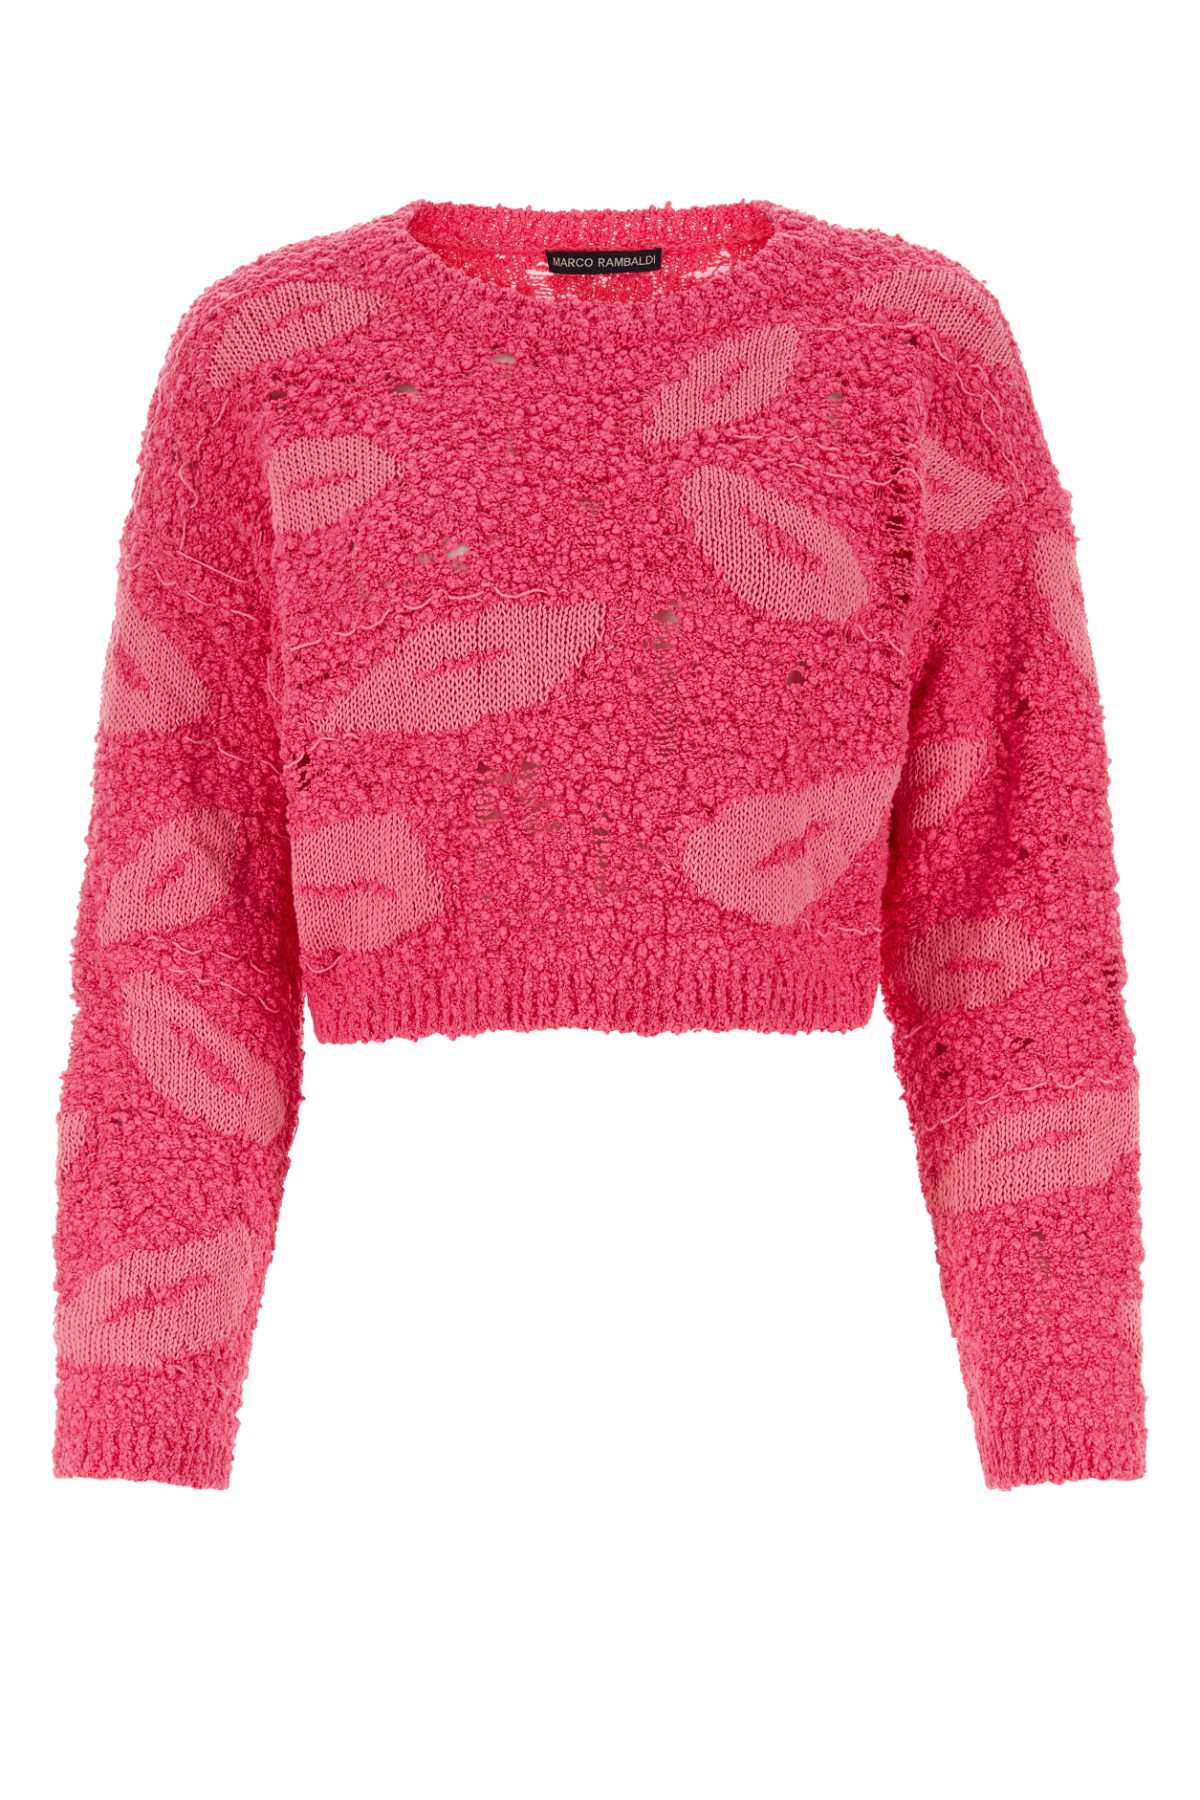 Embroidered Cotton Blend Sweater